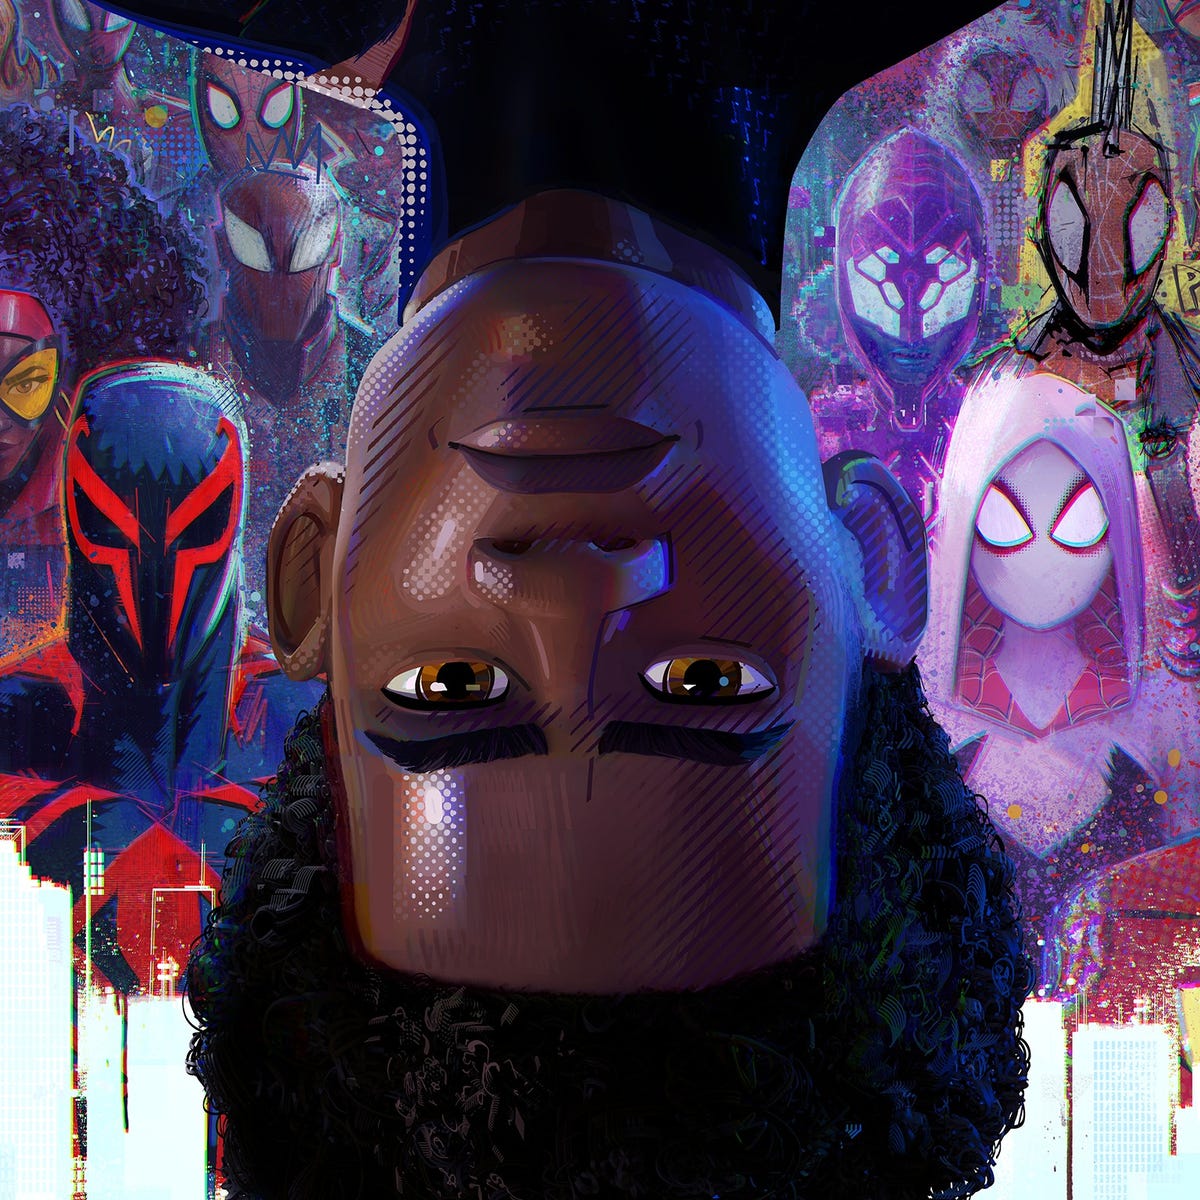 Spider-Man: Across the Spider-Verse' Poster Shows Army of Spider